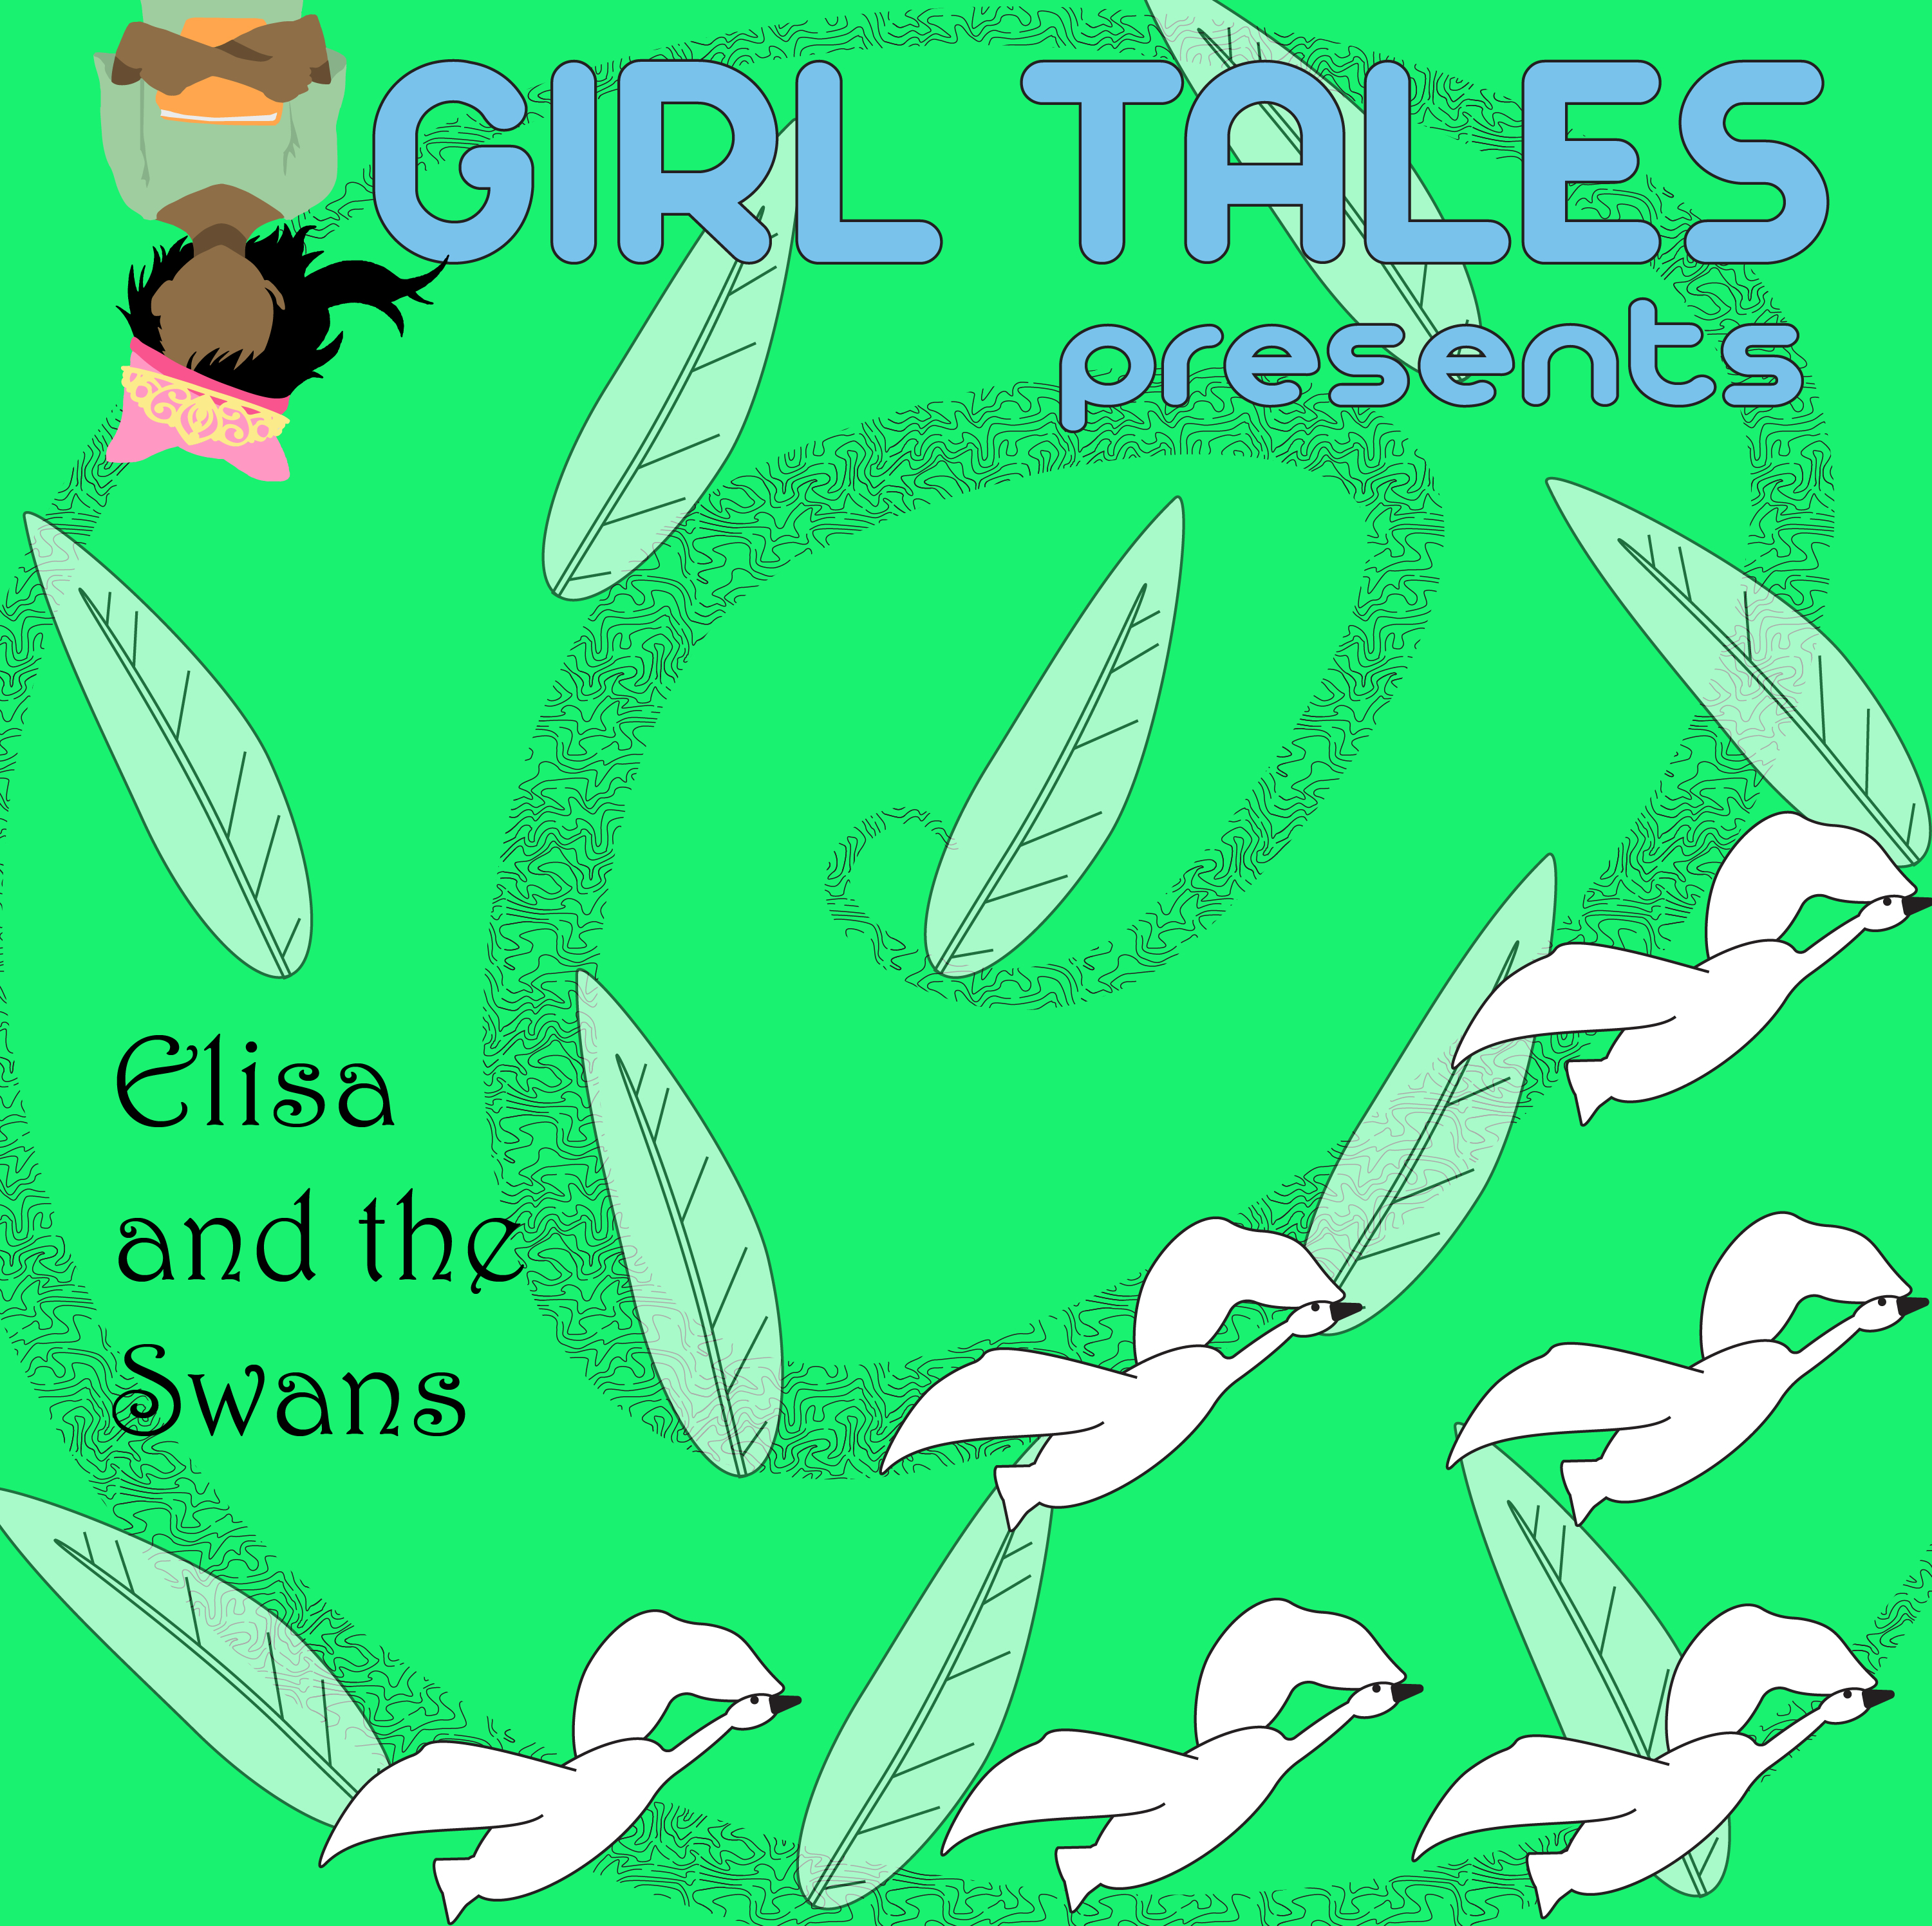 Elisa and the Swans: Part 2 by Lea McKenna-Garcia